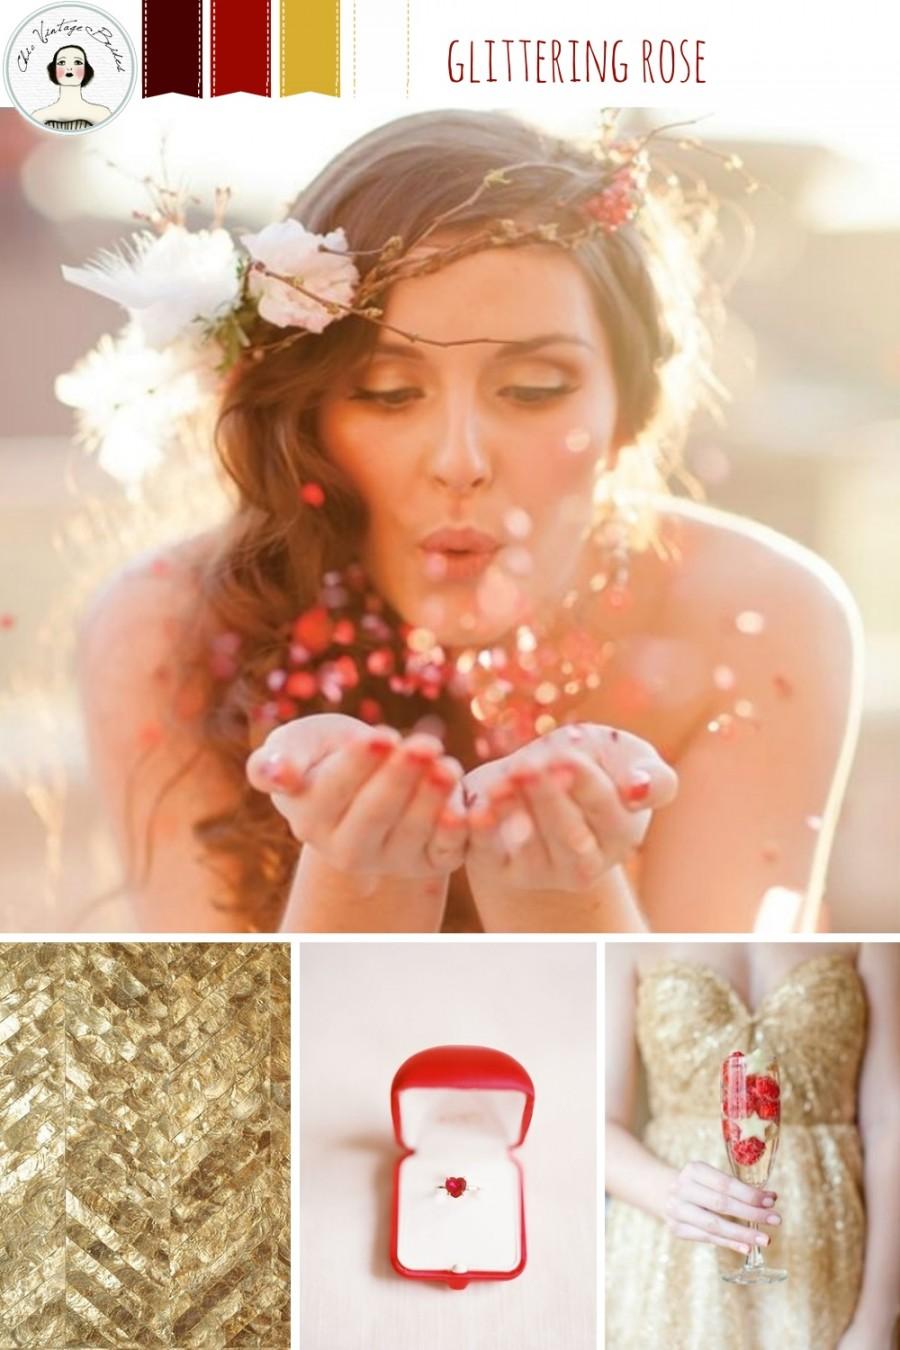 Wedding - Glittering Rose - Wedding Inspiration in Shades of Rich Red & Gold